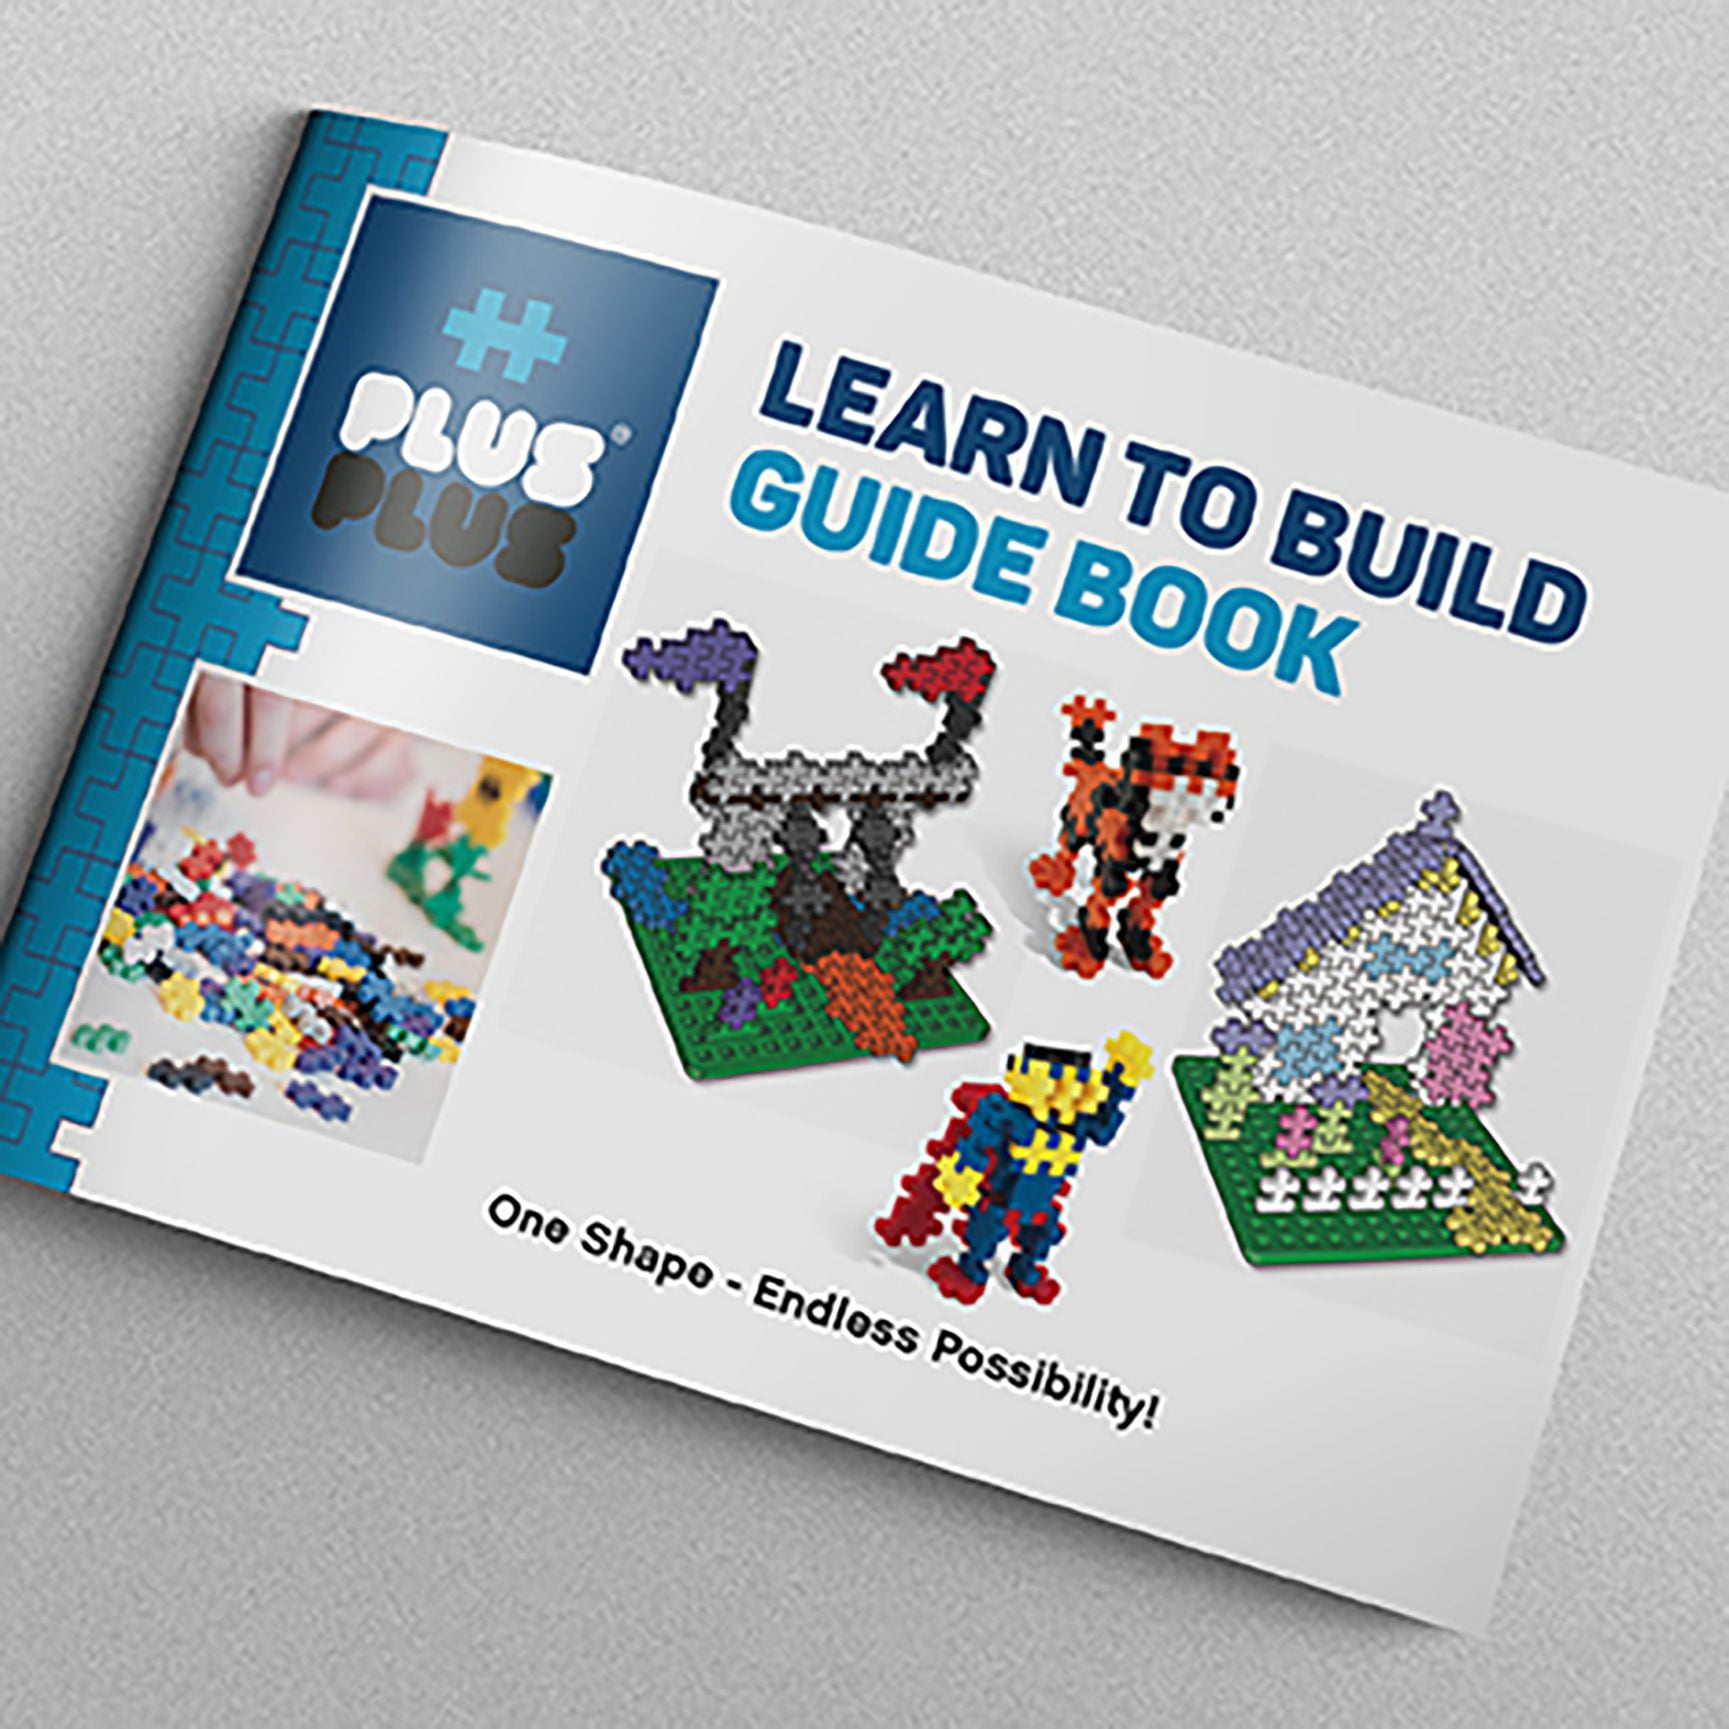 Plus-Plus - Learn to Build Open Play Building Set - 400 pc Basic